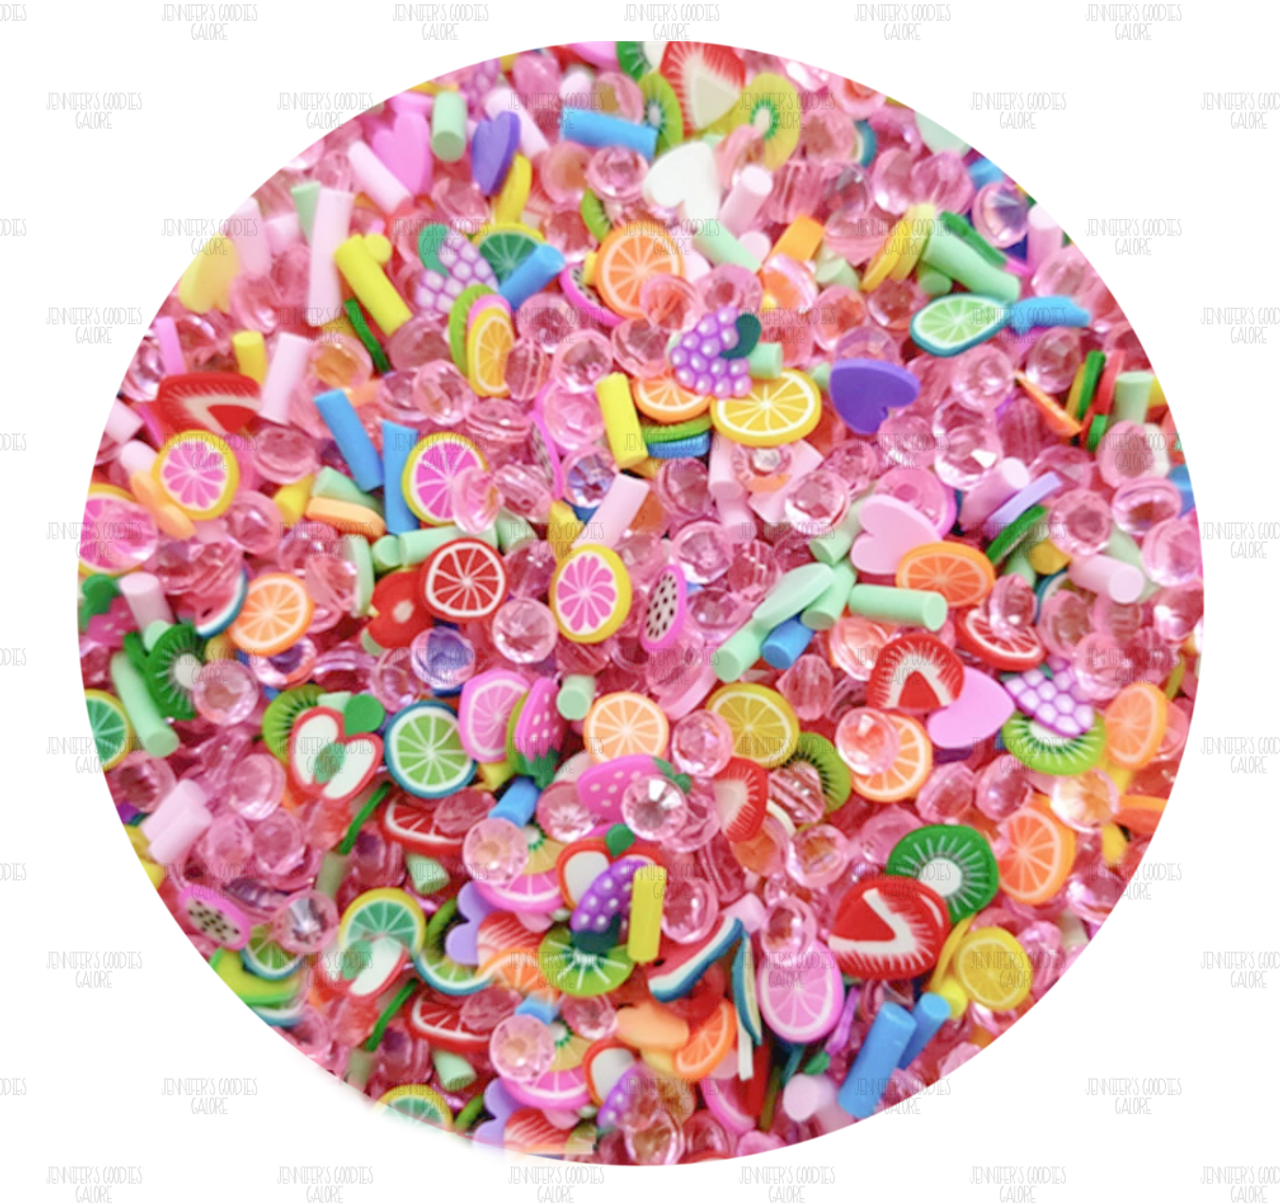 20gm, Polymer Clay Slices, Strawberry Clay Slices, Fruit Shaped Clay Slices  for Resin, Clay Slices Crafts, Pink Strawberries Confetti Loose Clay, Food